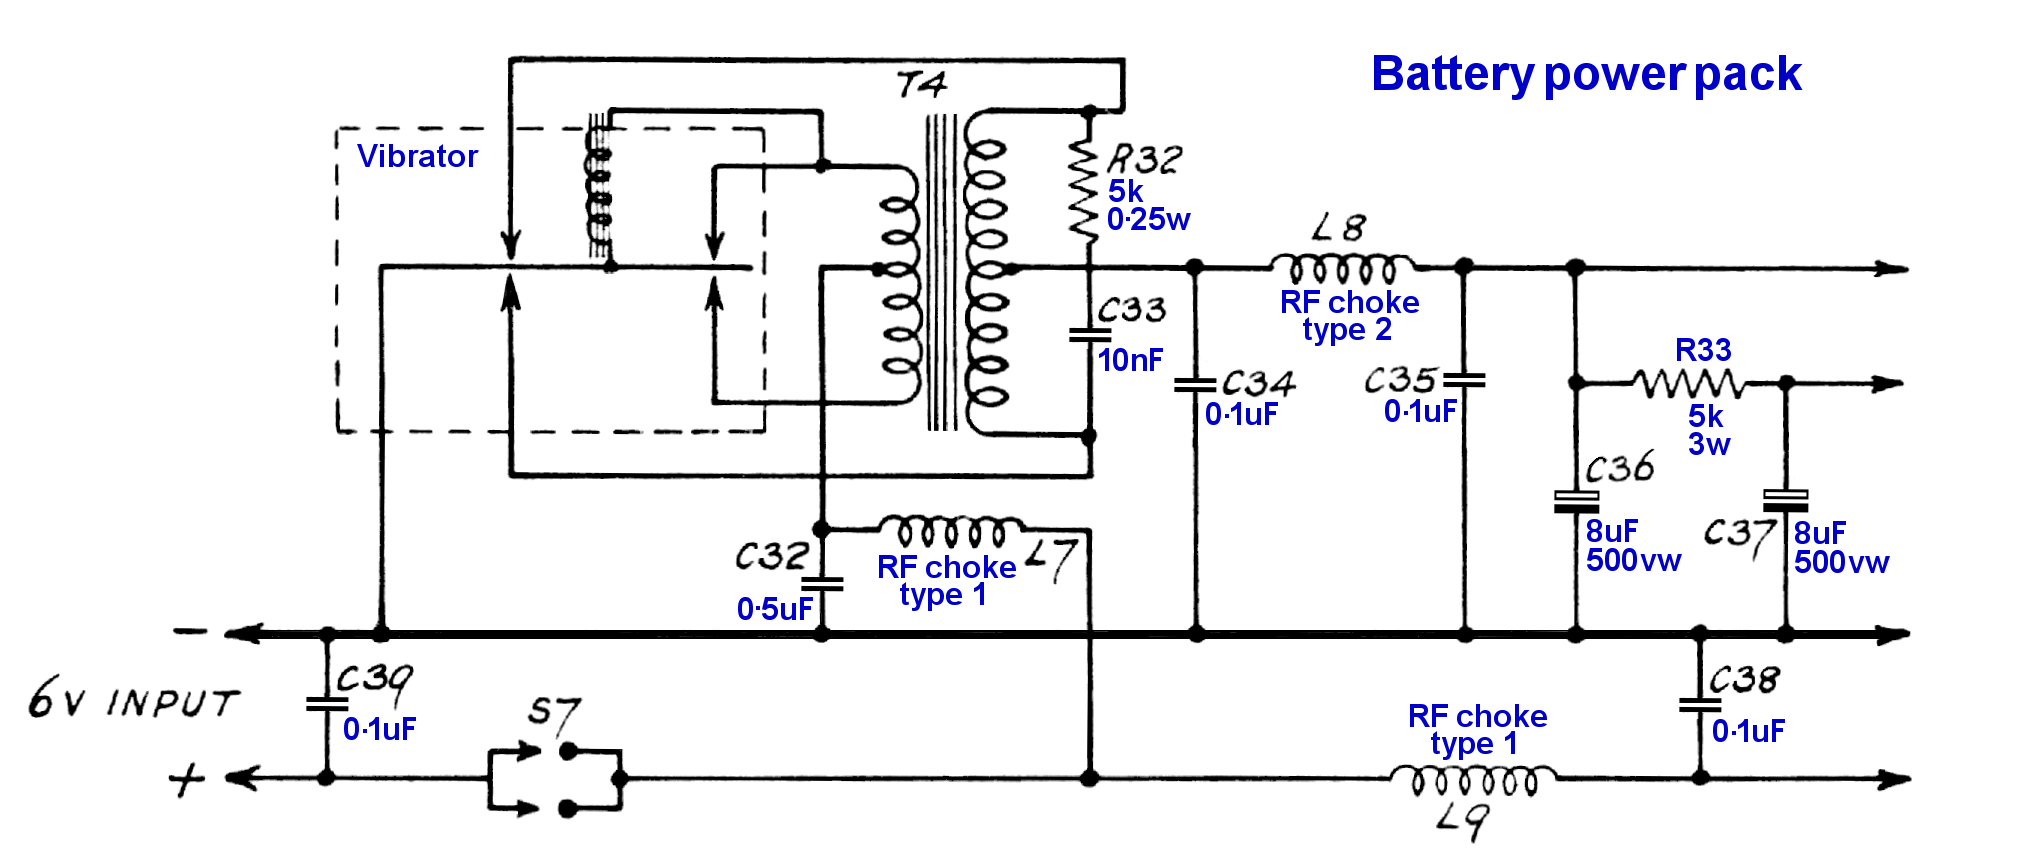 Wireless Set A battery supply circuit diagram